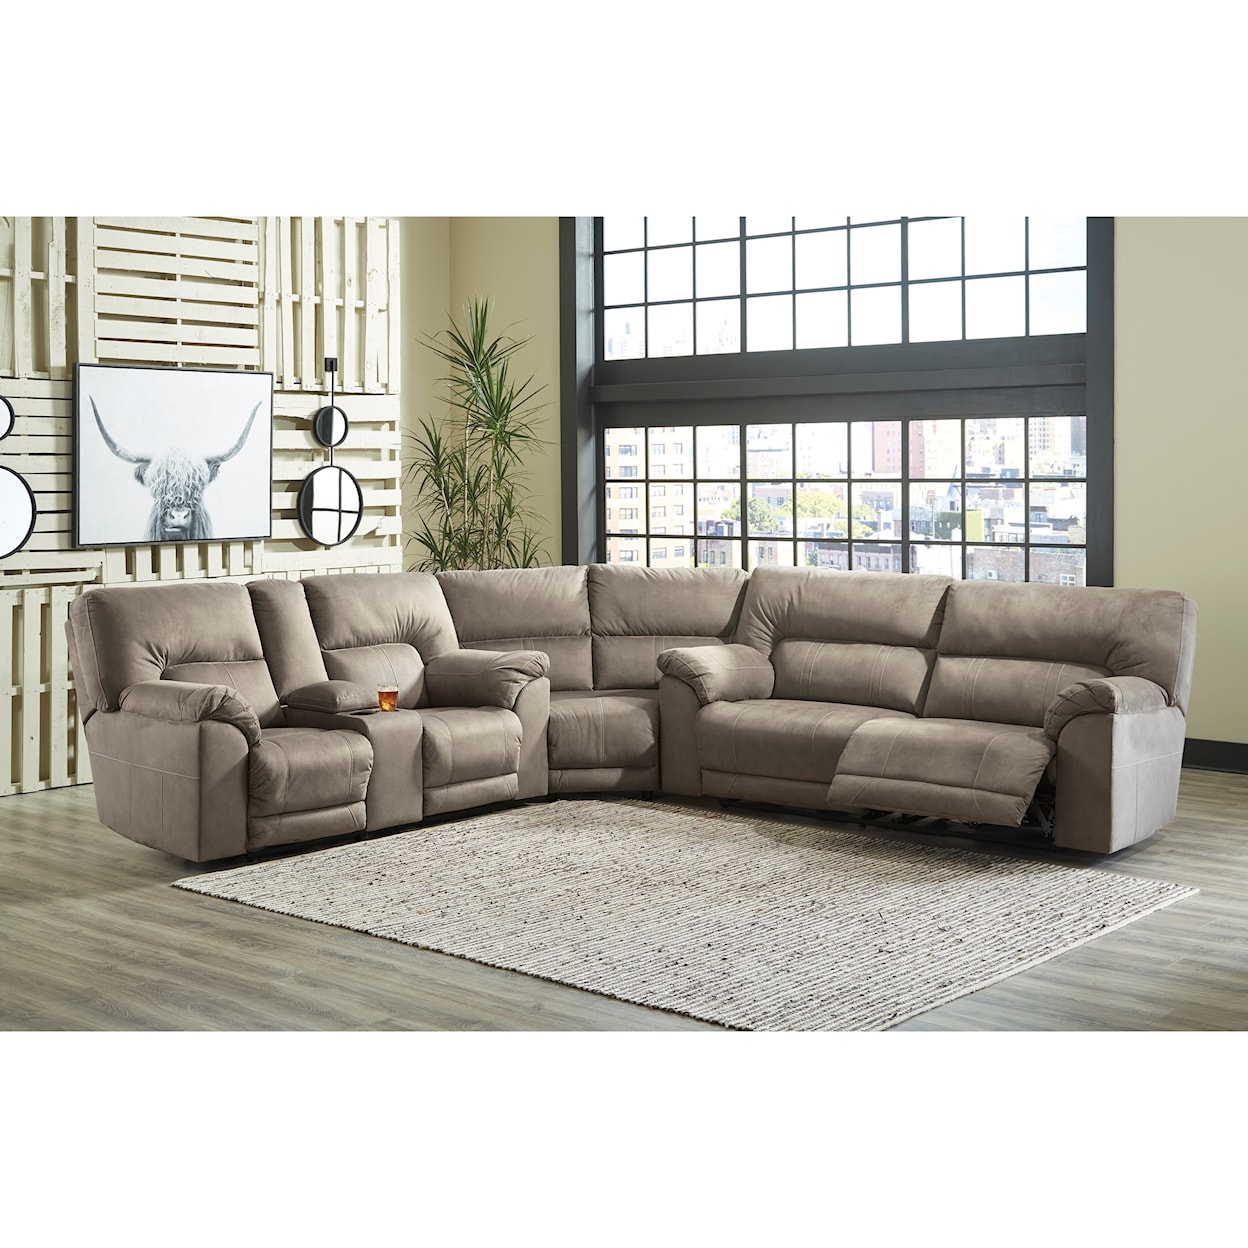 Benchcraft by Ashley Cavalcade Reclining Sectional